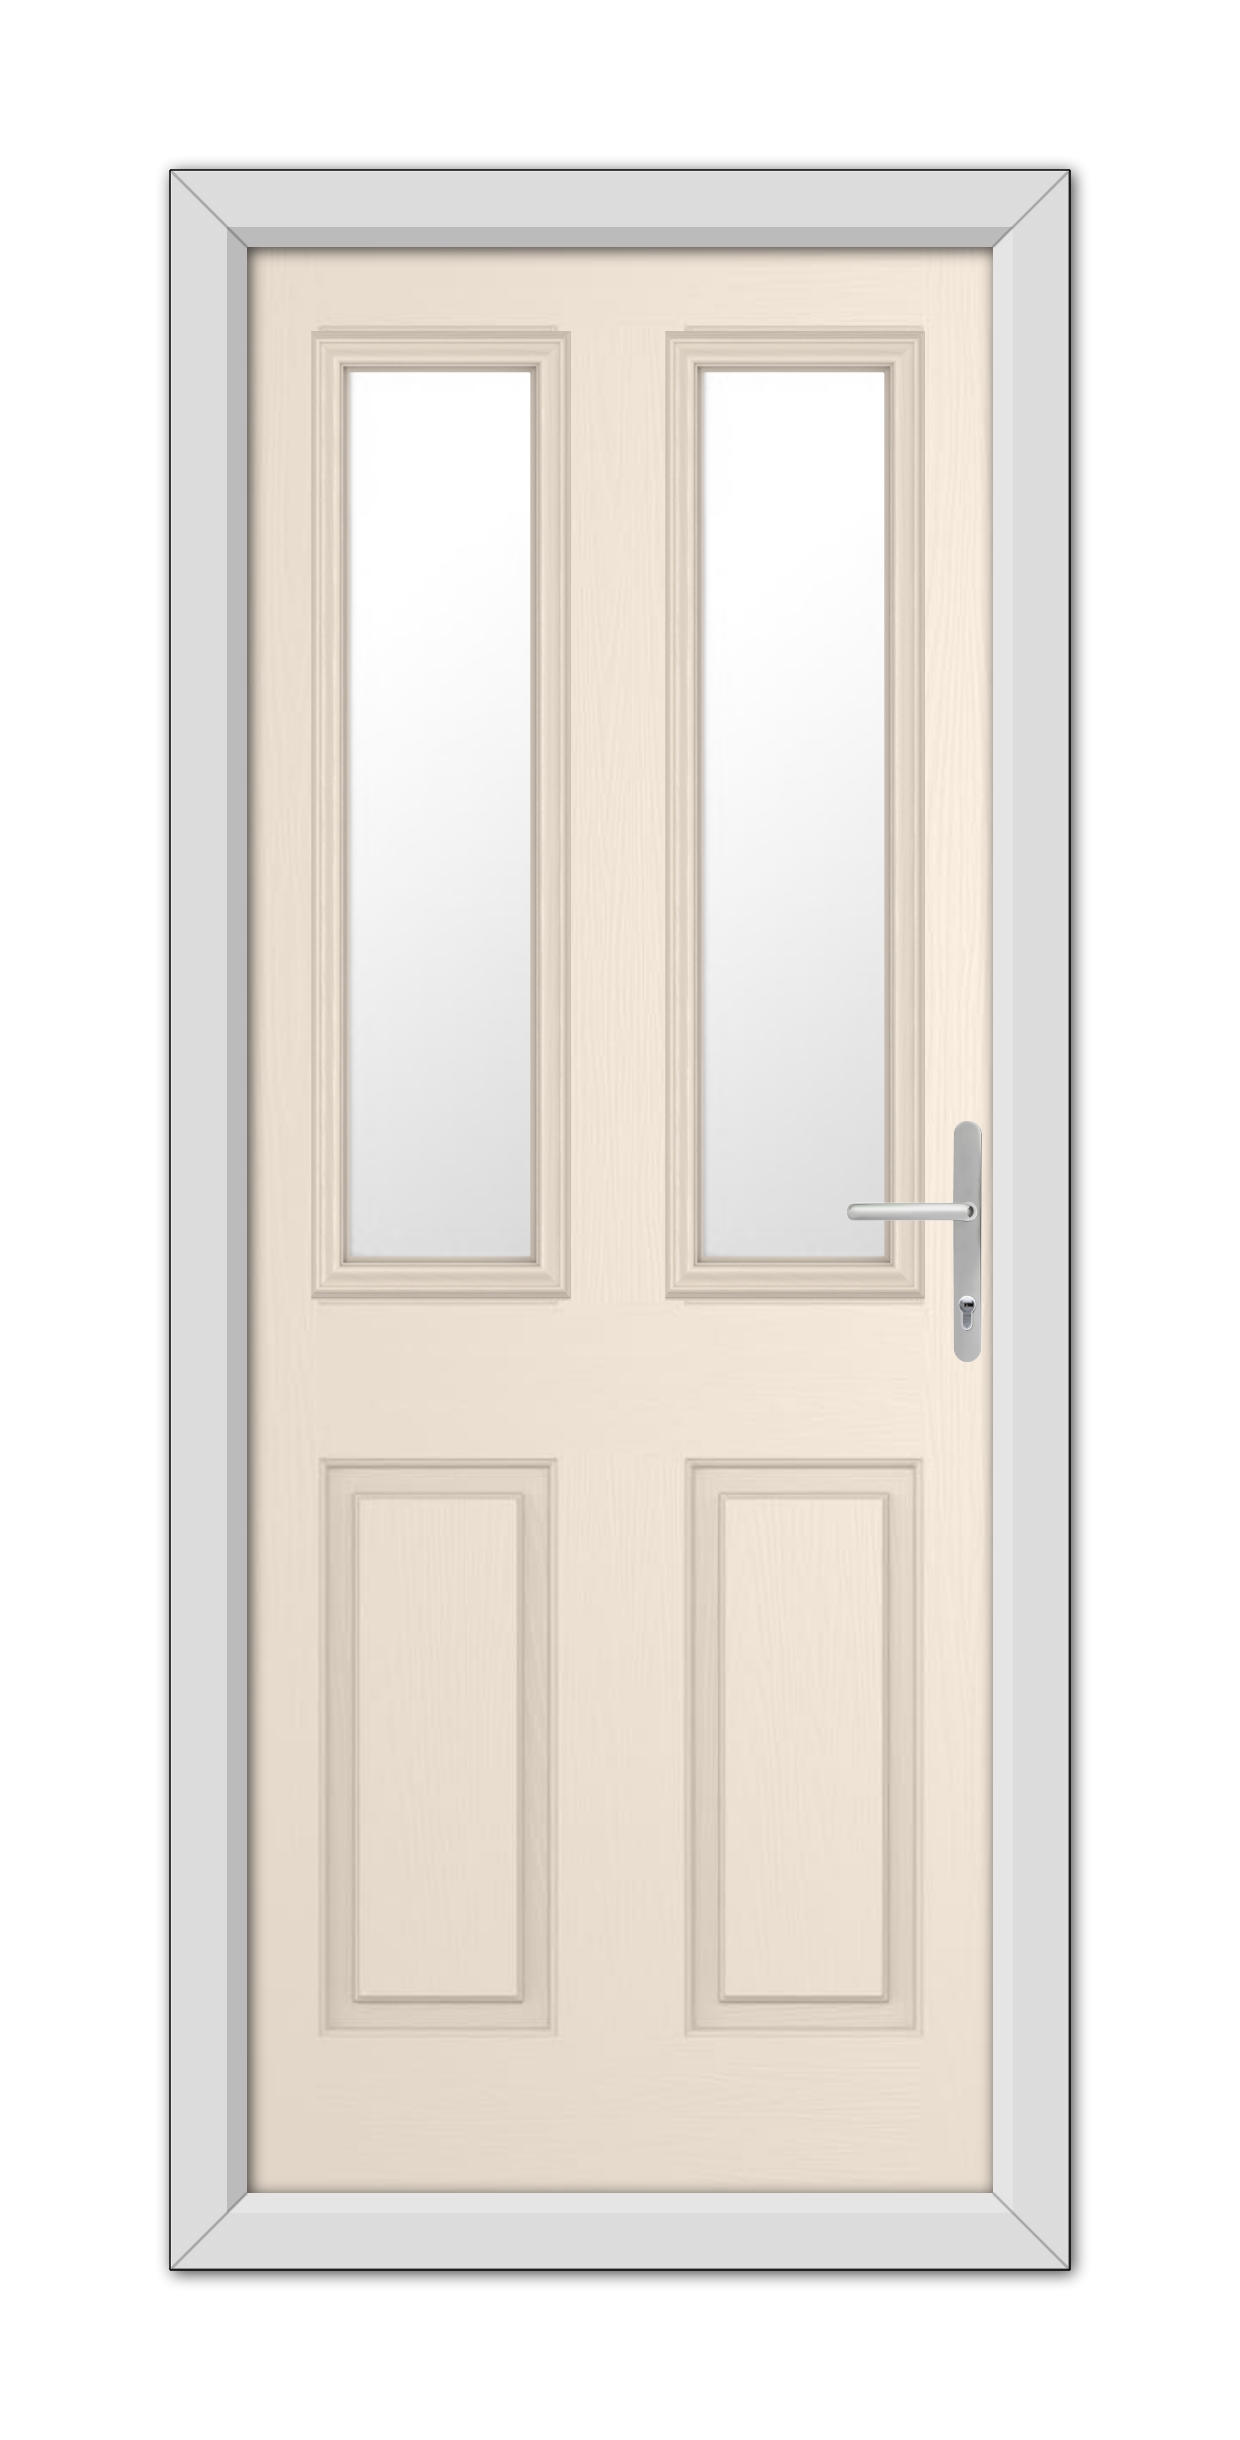 A modern Cream Whitmore Composite Door 48mm Timber Core with a light wood finish and rectangular glass panels near the top, framed in metal, with a handle on the right.